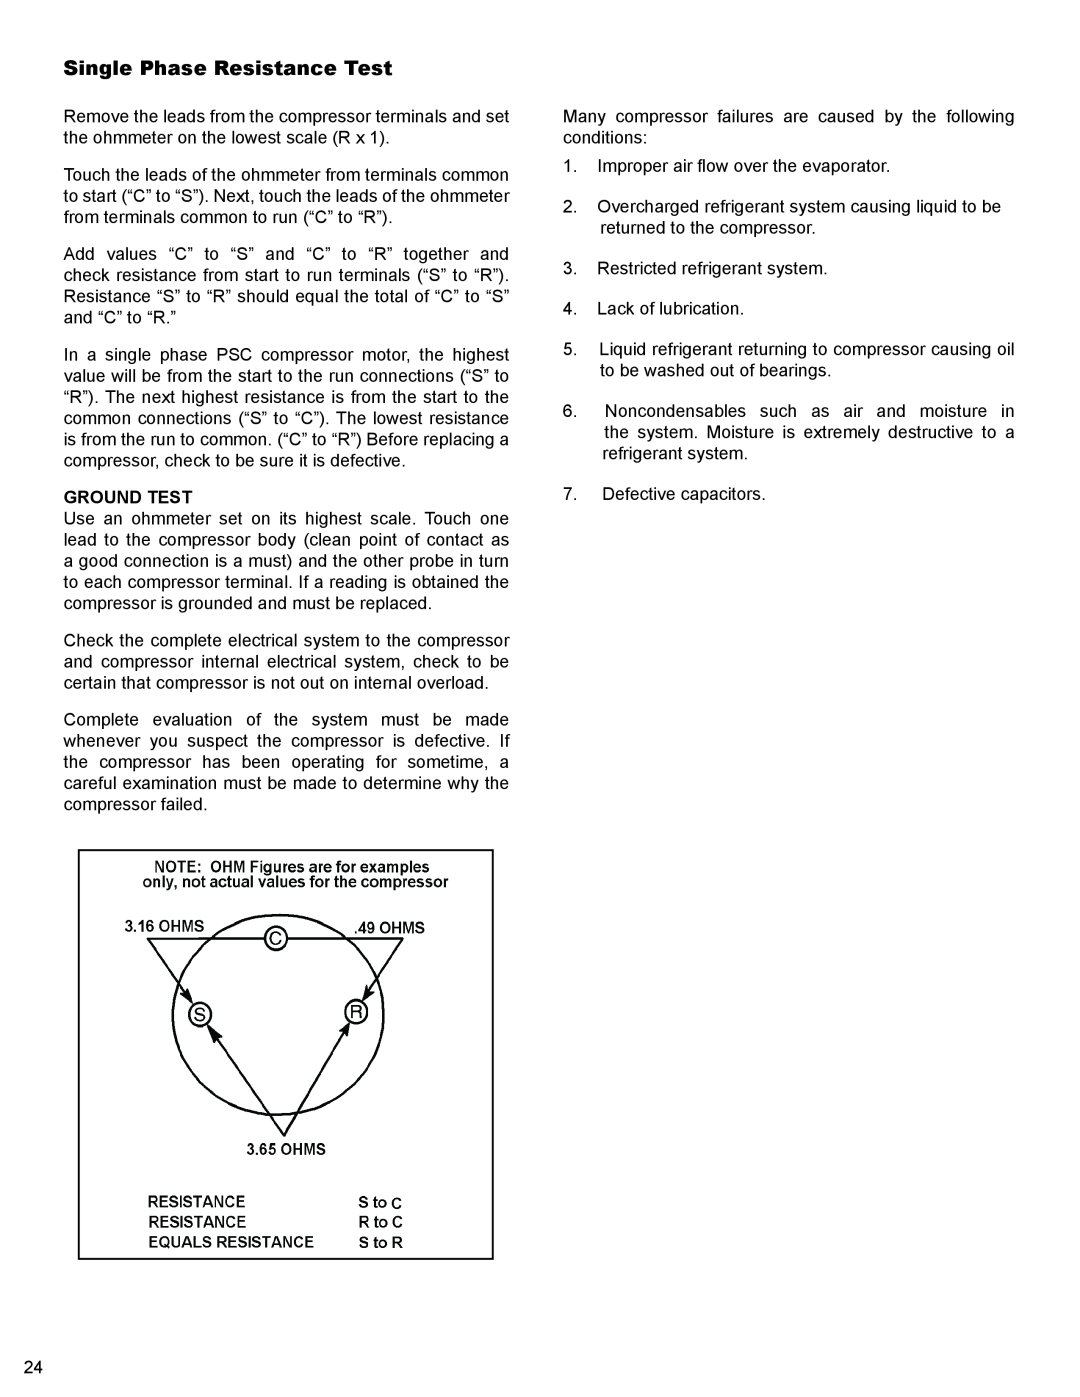 Friedrich R-410A service manual Single Phase Resistance Test, Ground Test 